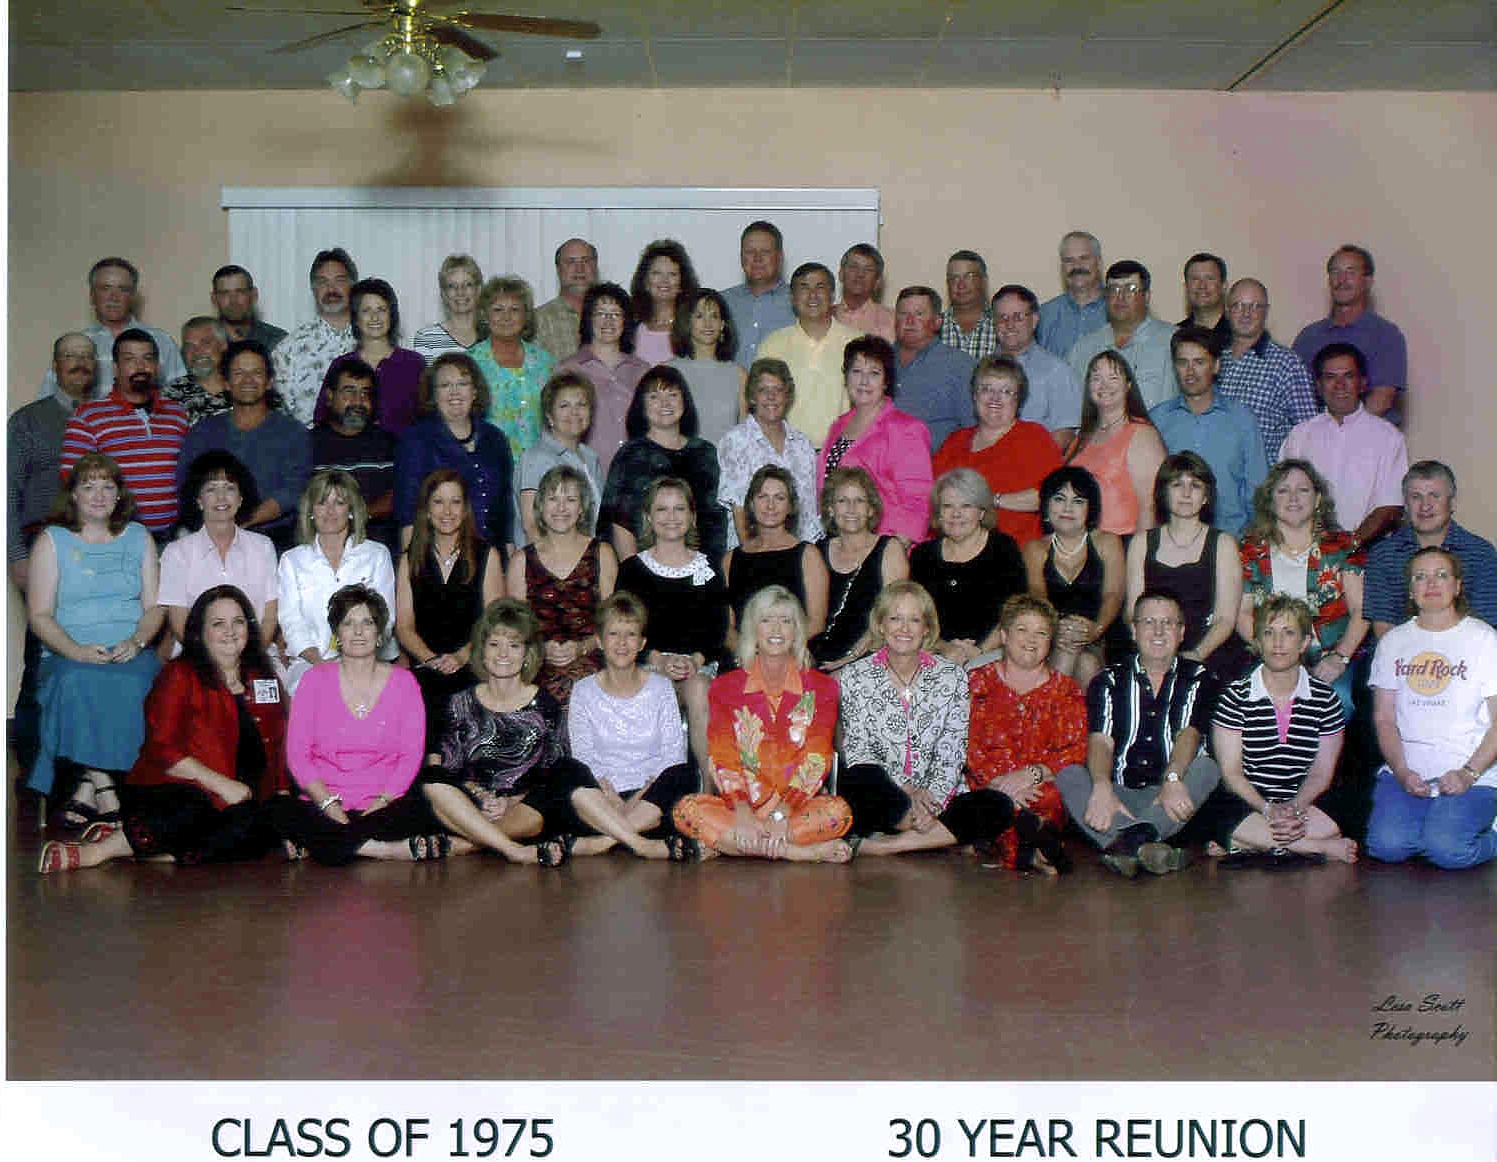 30 year reunion photo  If anyone has name listing (in order) email or message me, and i'll post it